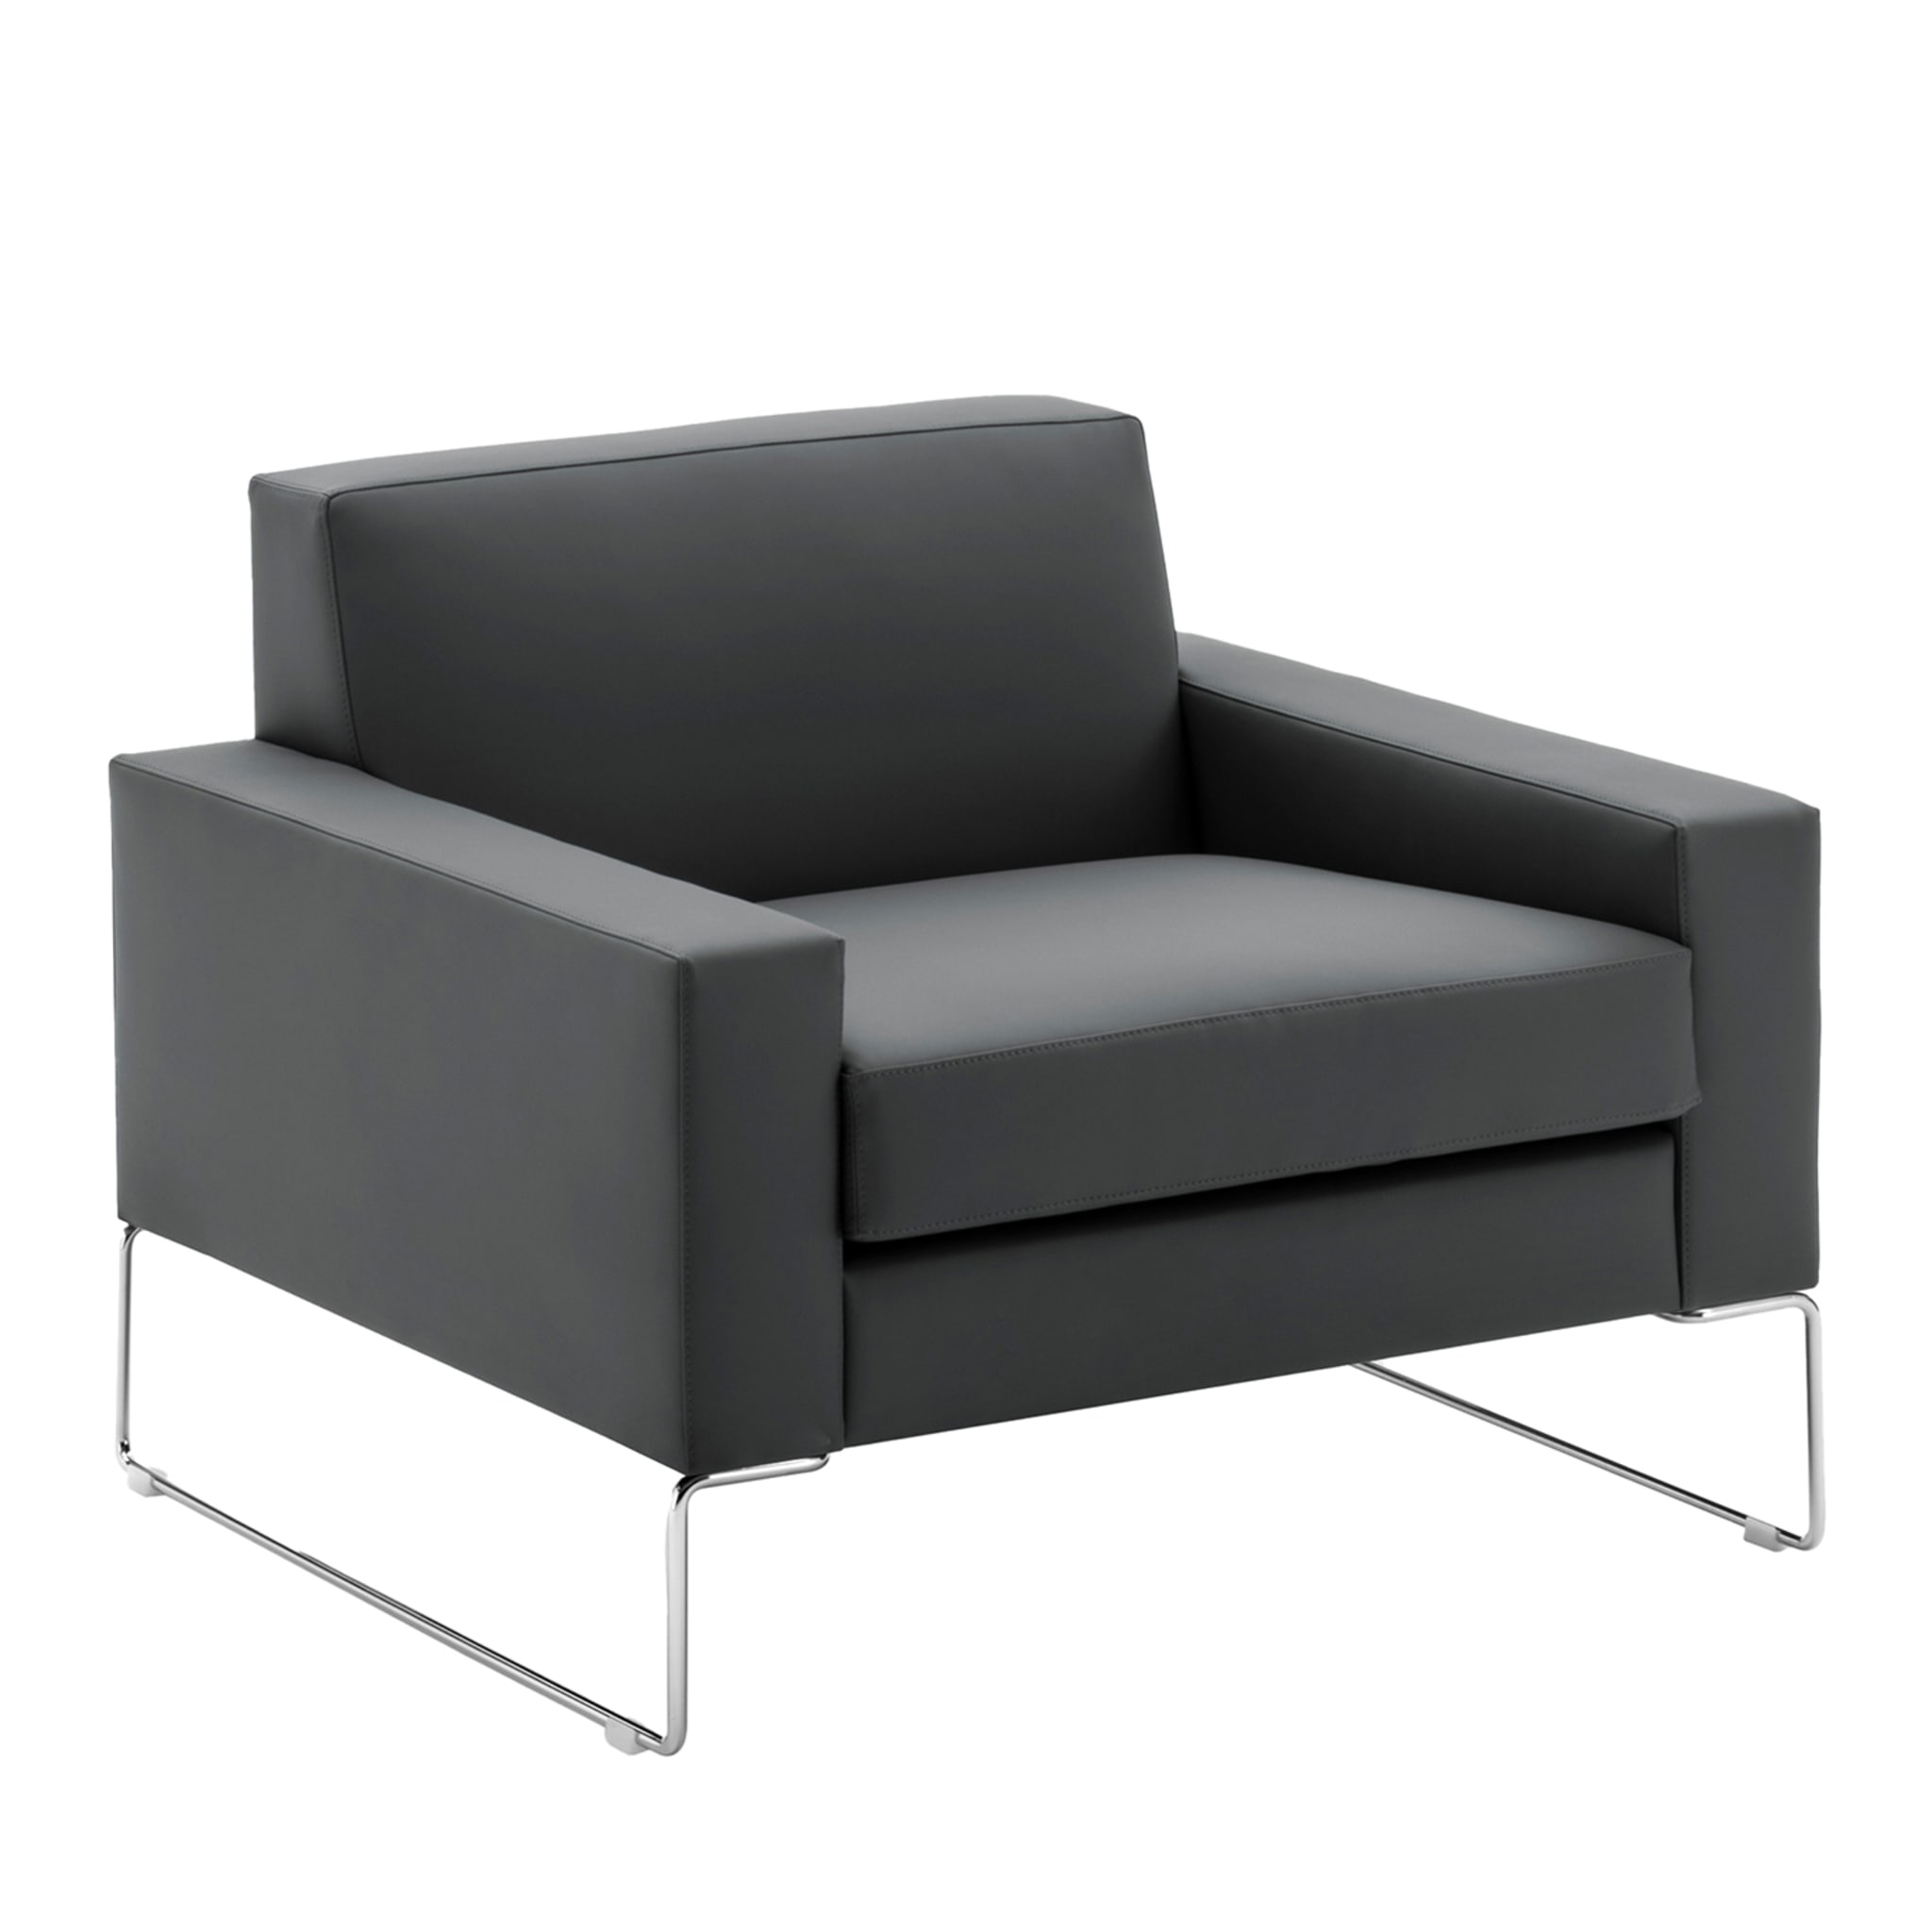 CUBIKO anthracite armchair #1 - Main view